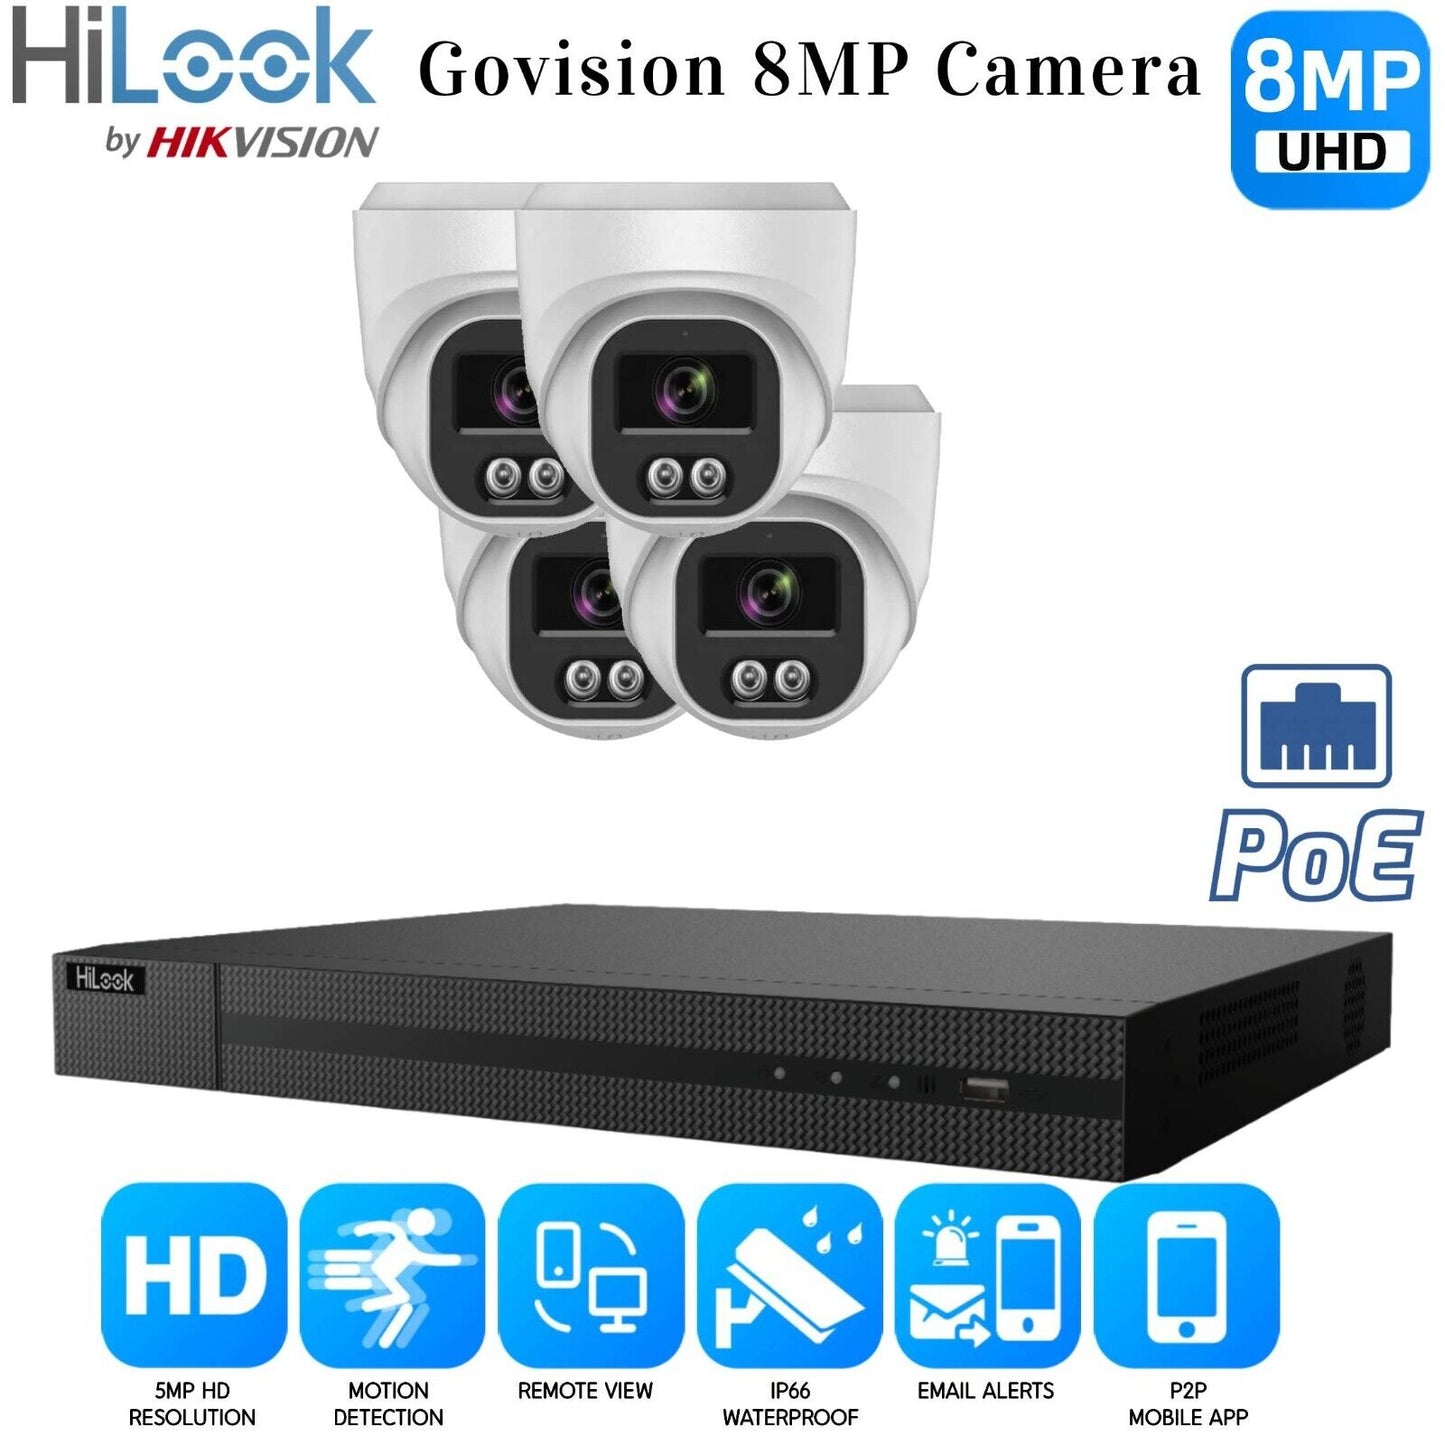 HIKVISION CCTV SYSTEM IP POE 8MP AUDIO MIC CAMERA SMART NIGHTVISION SECURITY KIT 4CH NVR 4x Cameras 1TB HDD